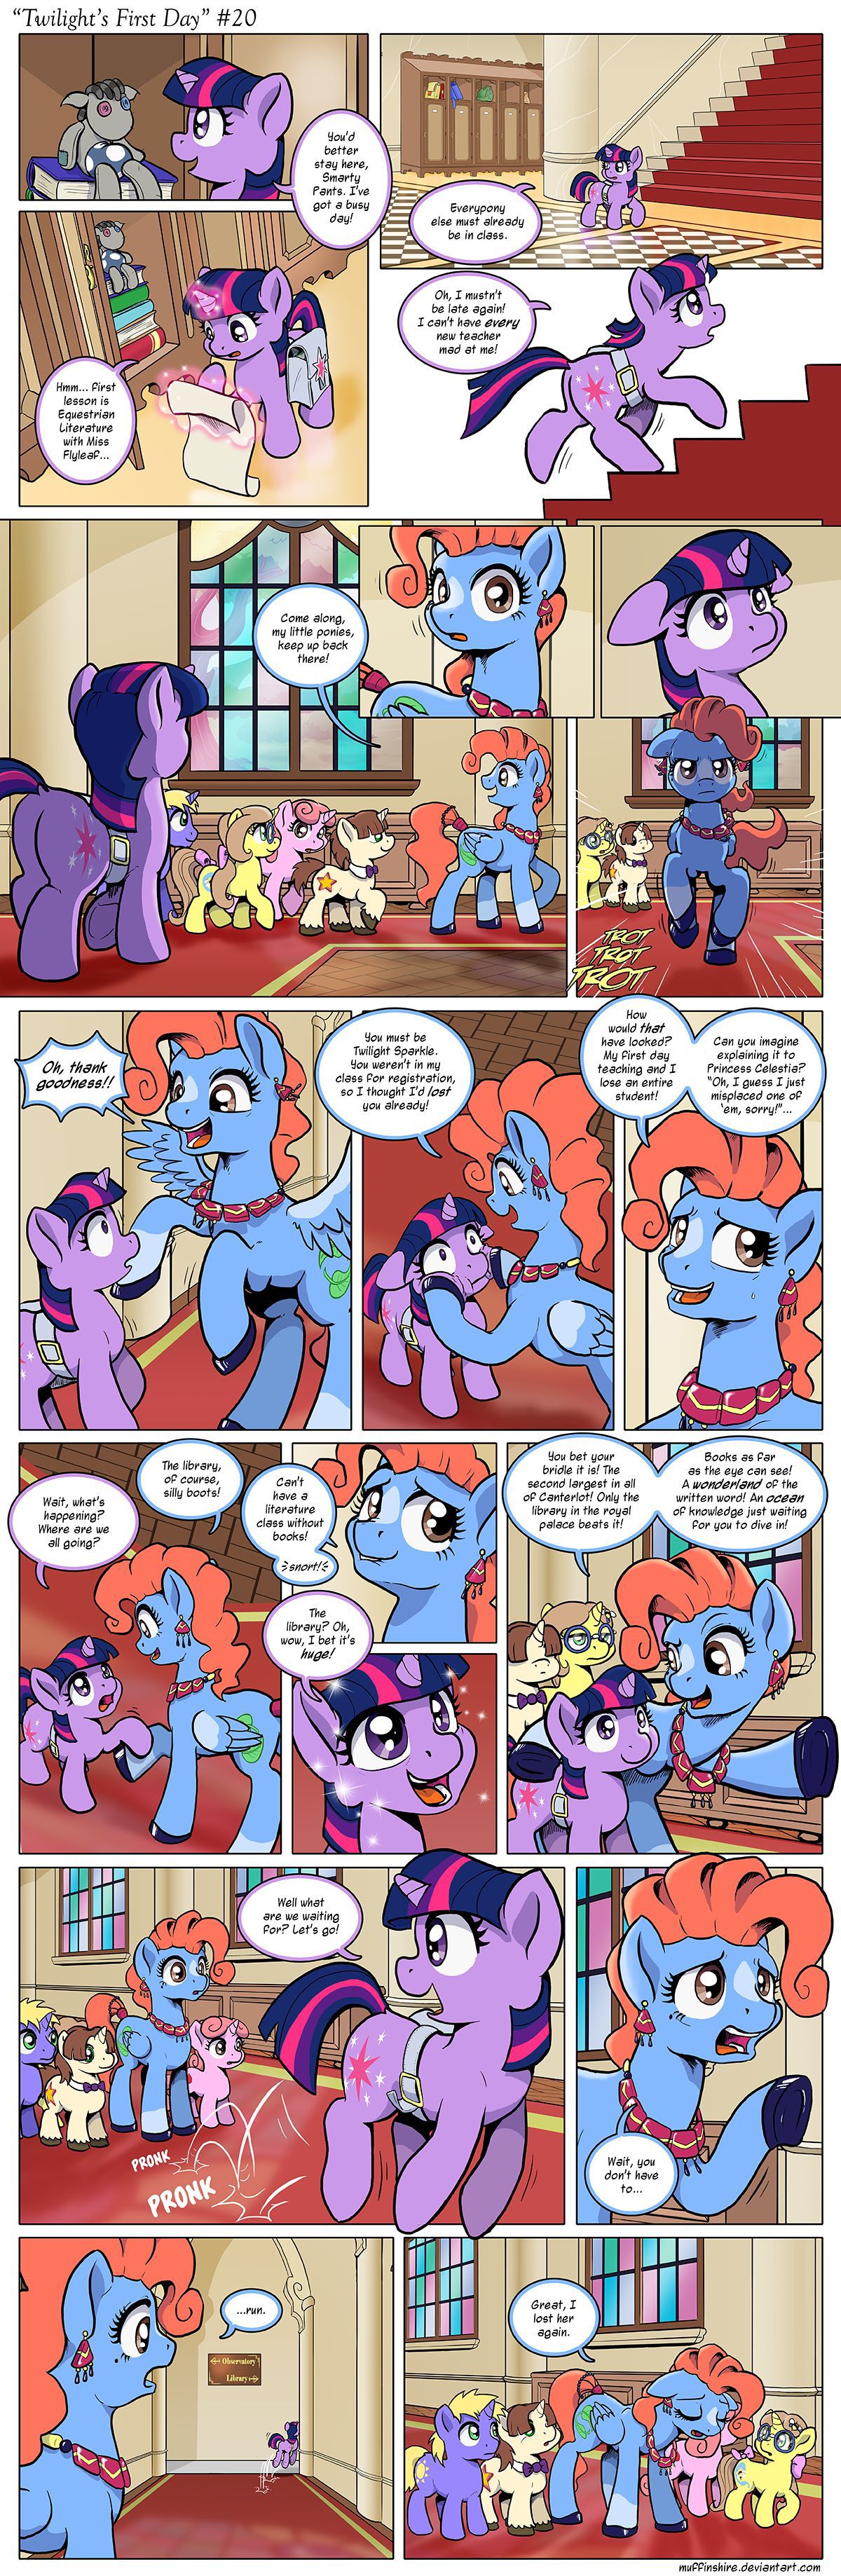 [Muffinshire] Twilight's First Day (My Little Pony: Friendship is Magic) [English] 20